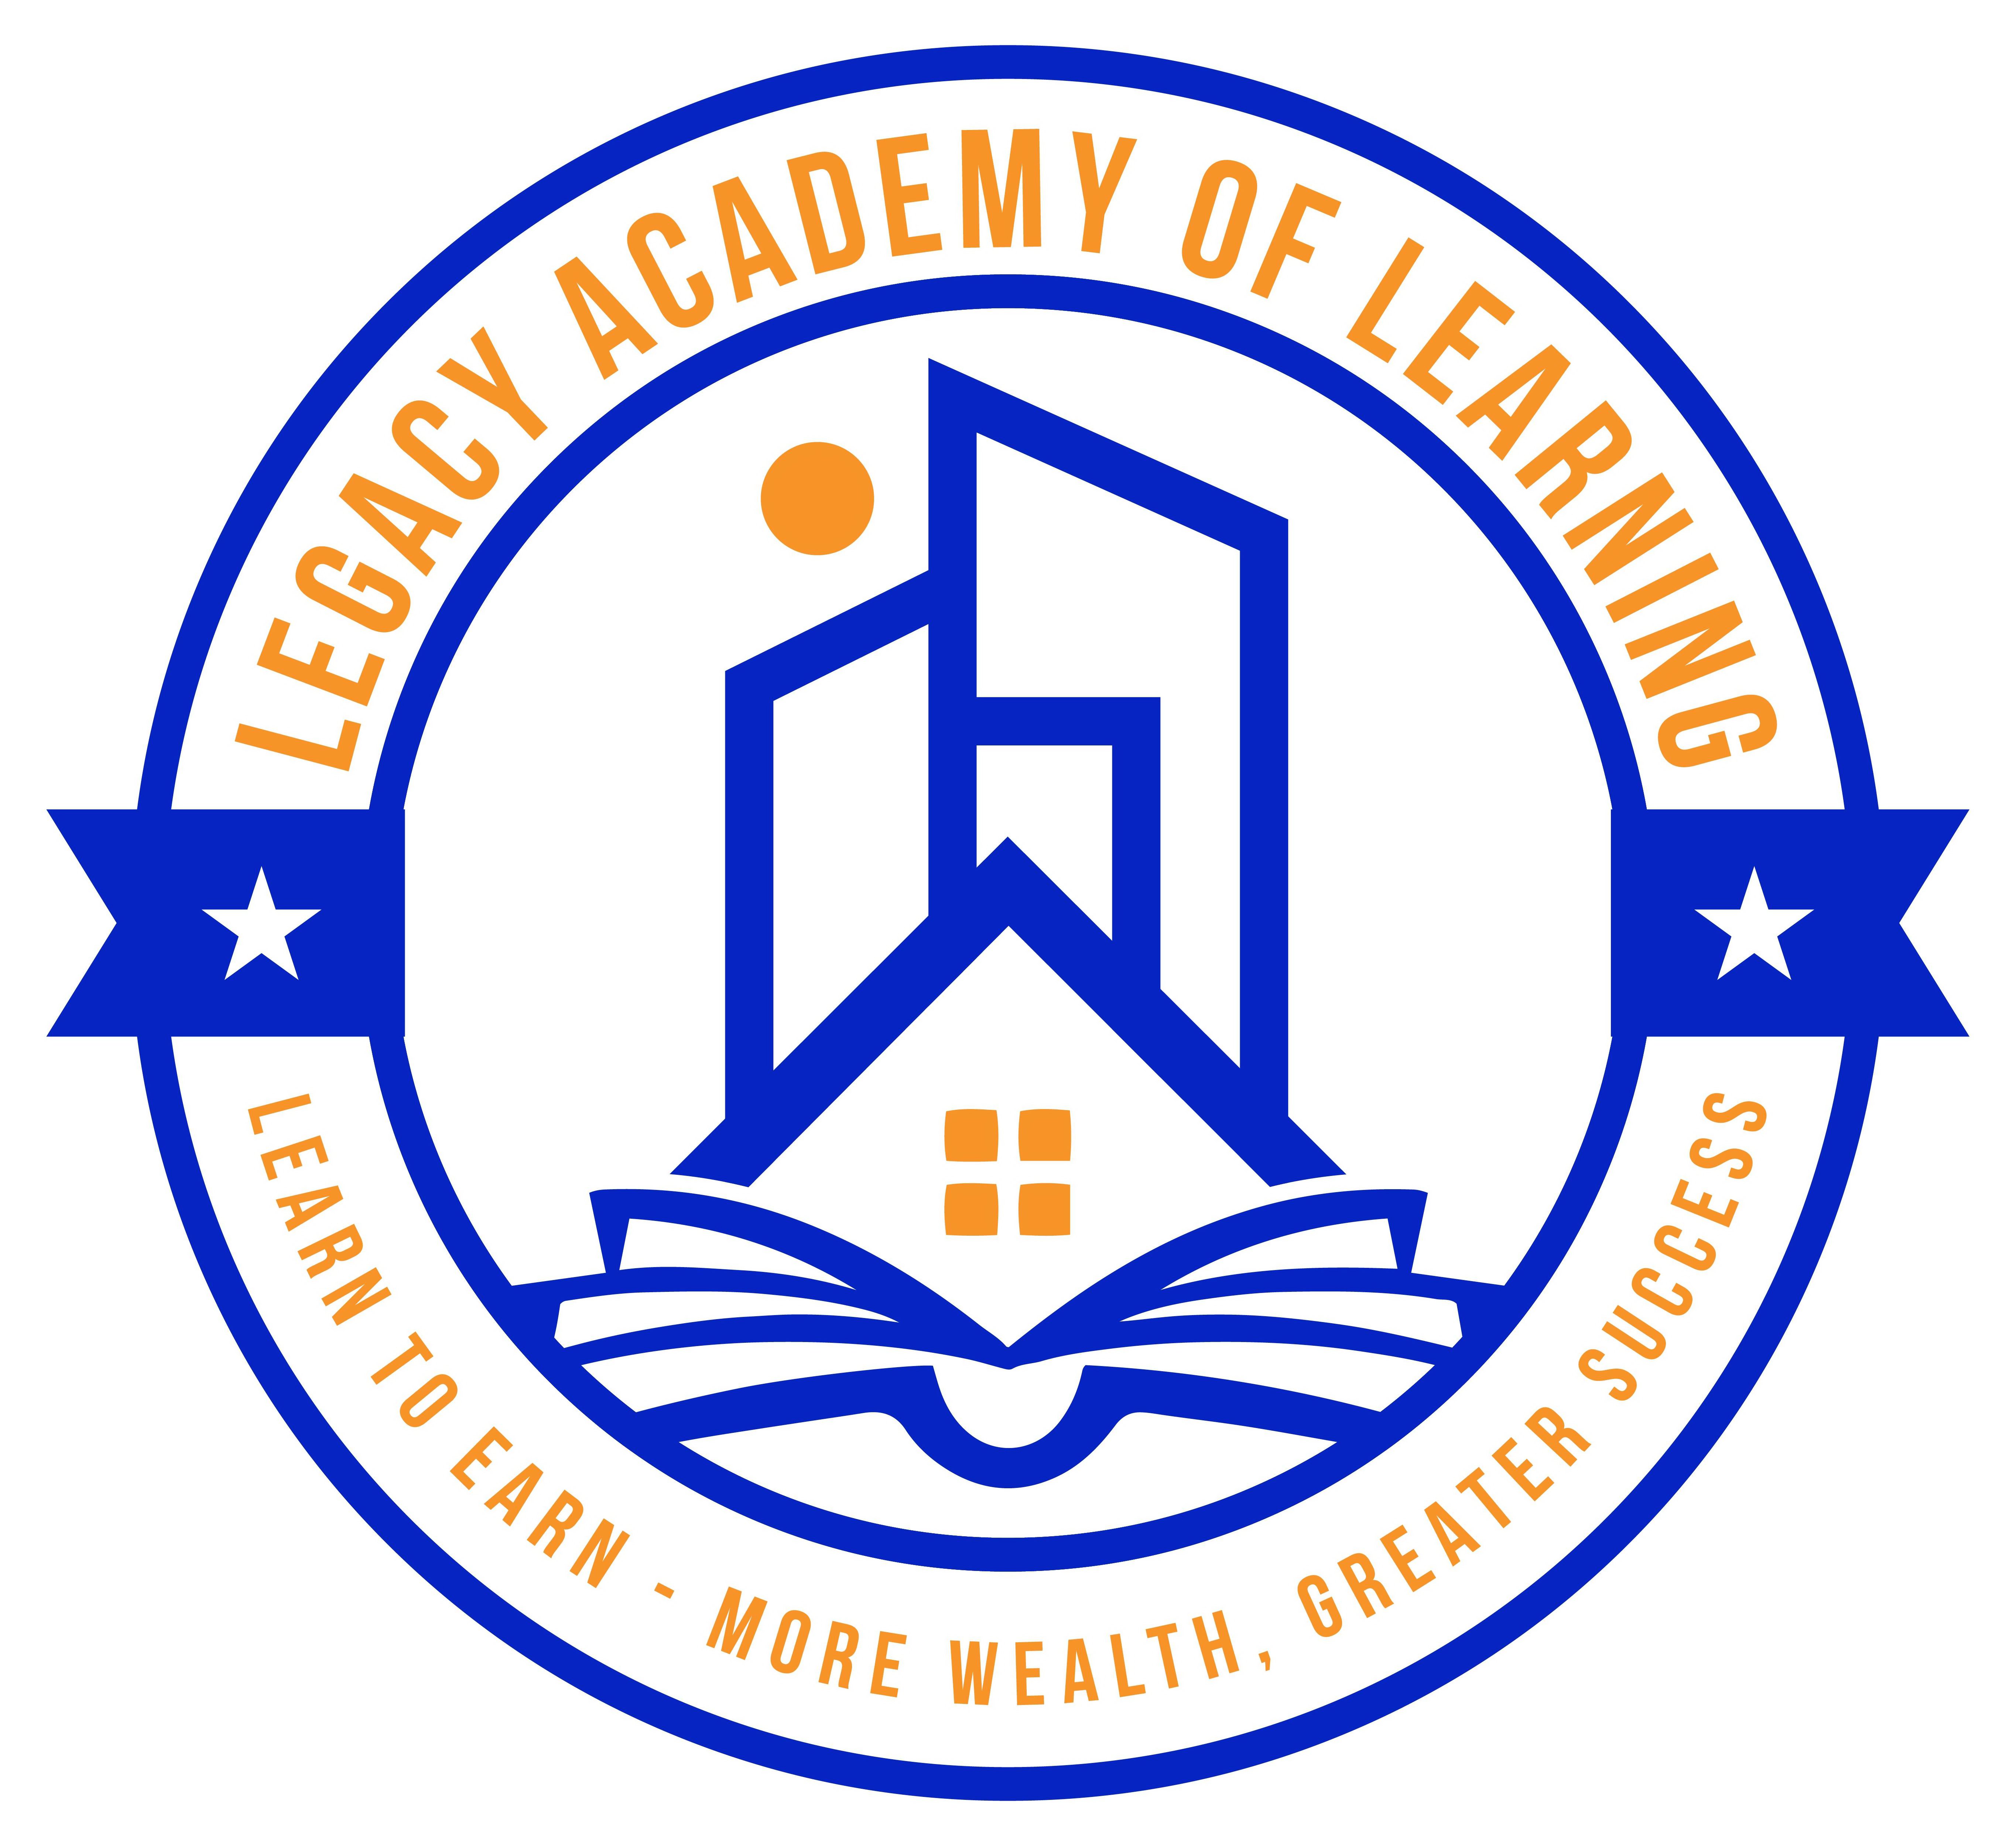  LEGACY ACADEMY OF LEARNING